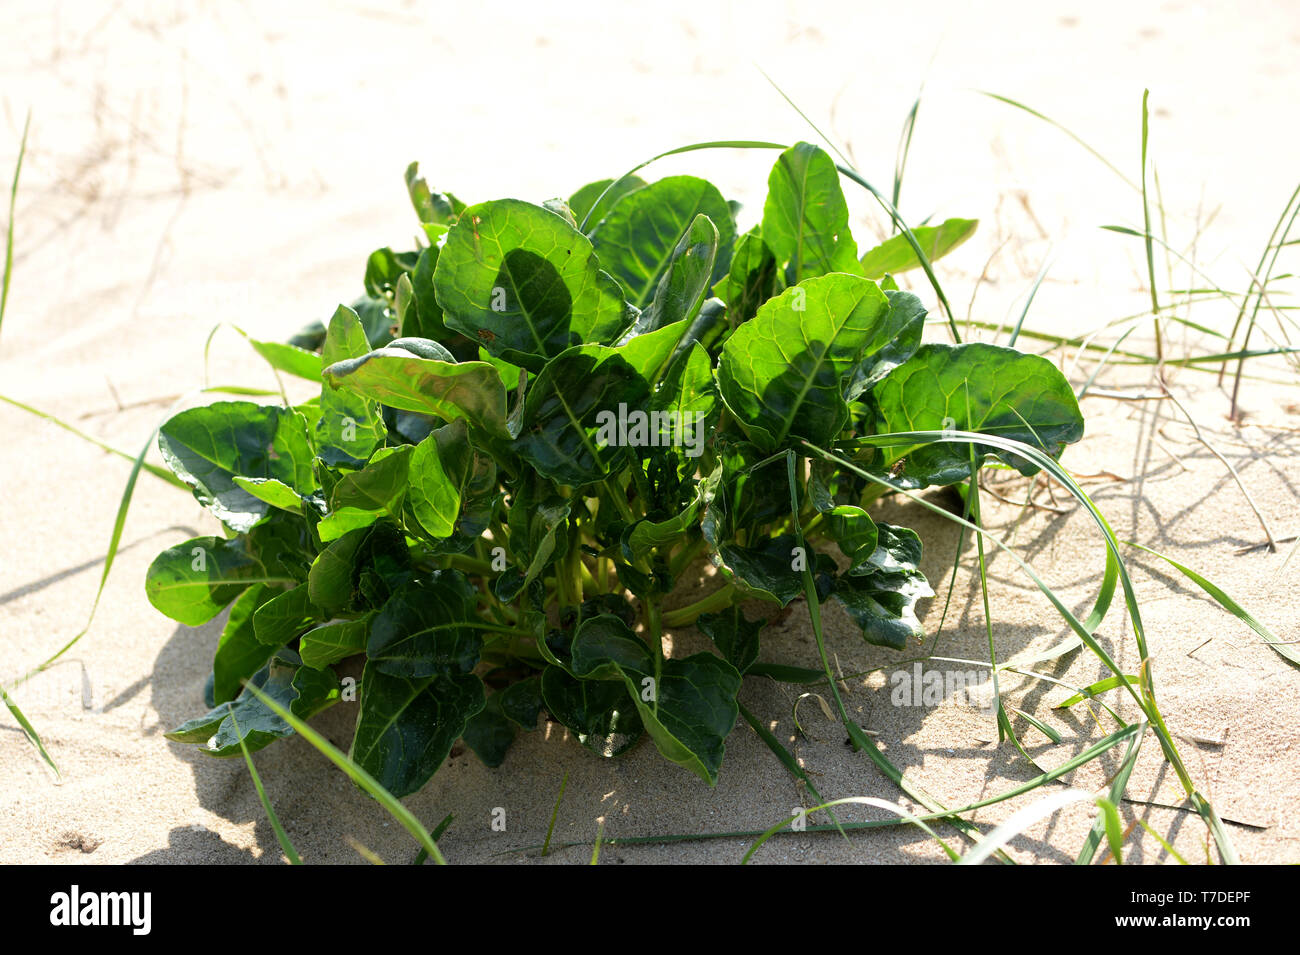 Sea Beet growing on sand dune- the ancestor of cultivated modern varieties such as beetroot and sugar beet. Stock Photo